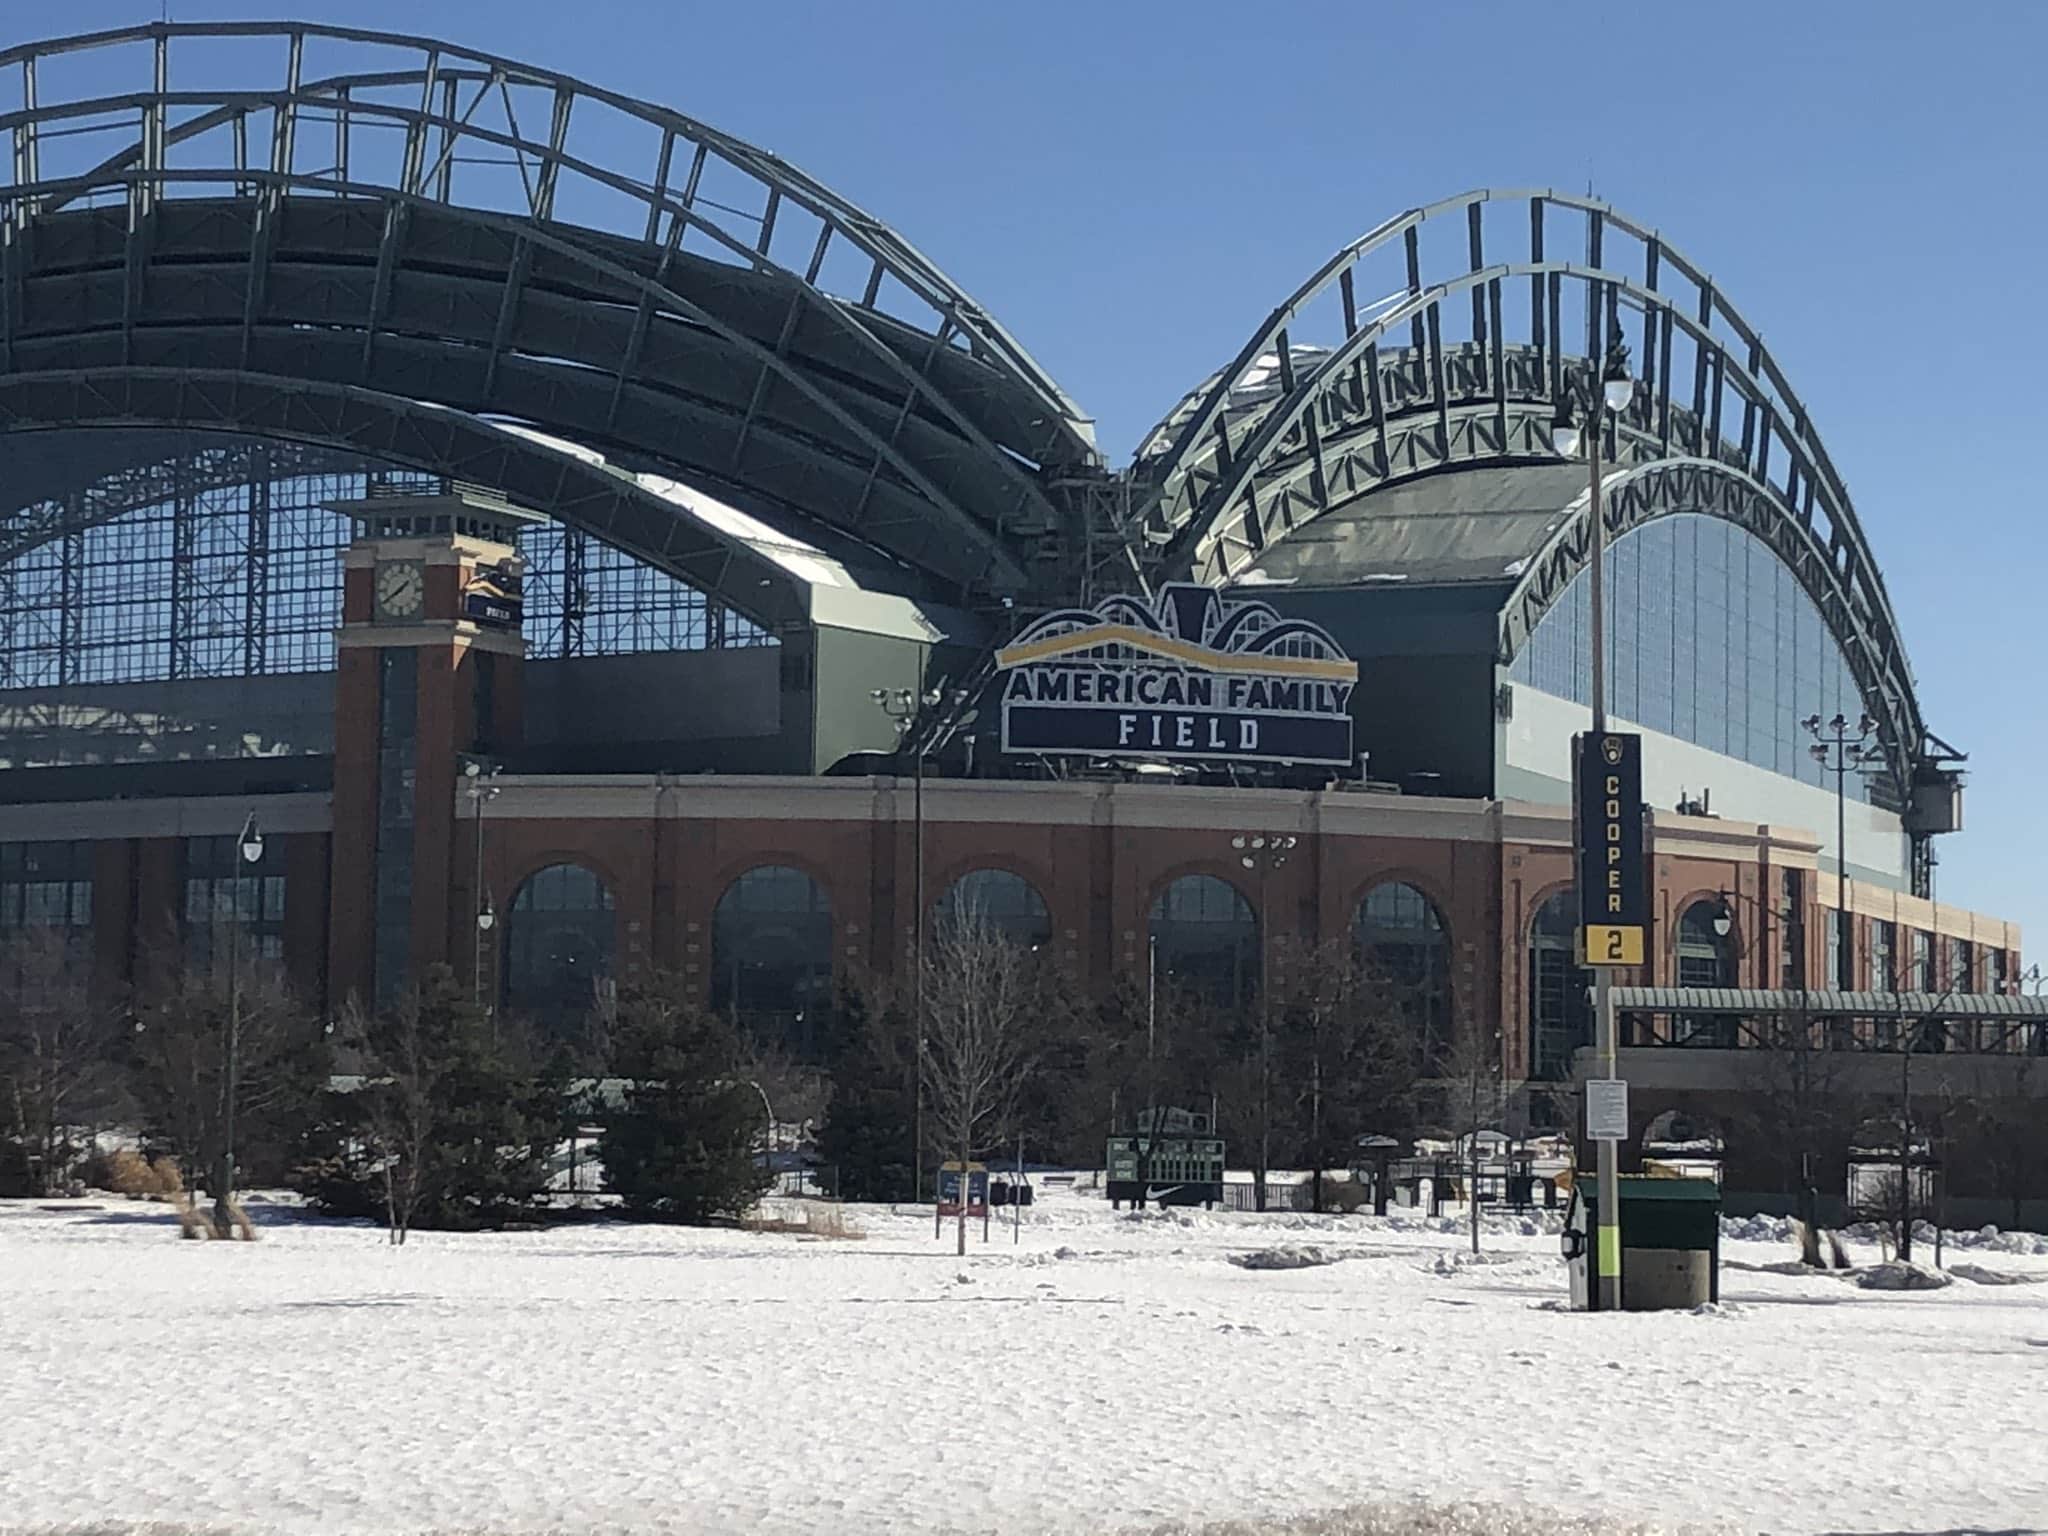 Brewers To Open Season With 25% Capacity At American Family Field